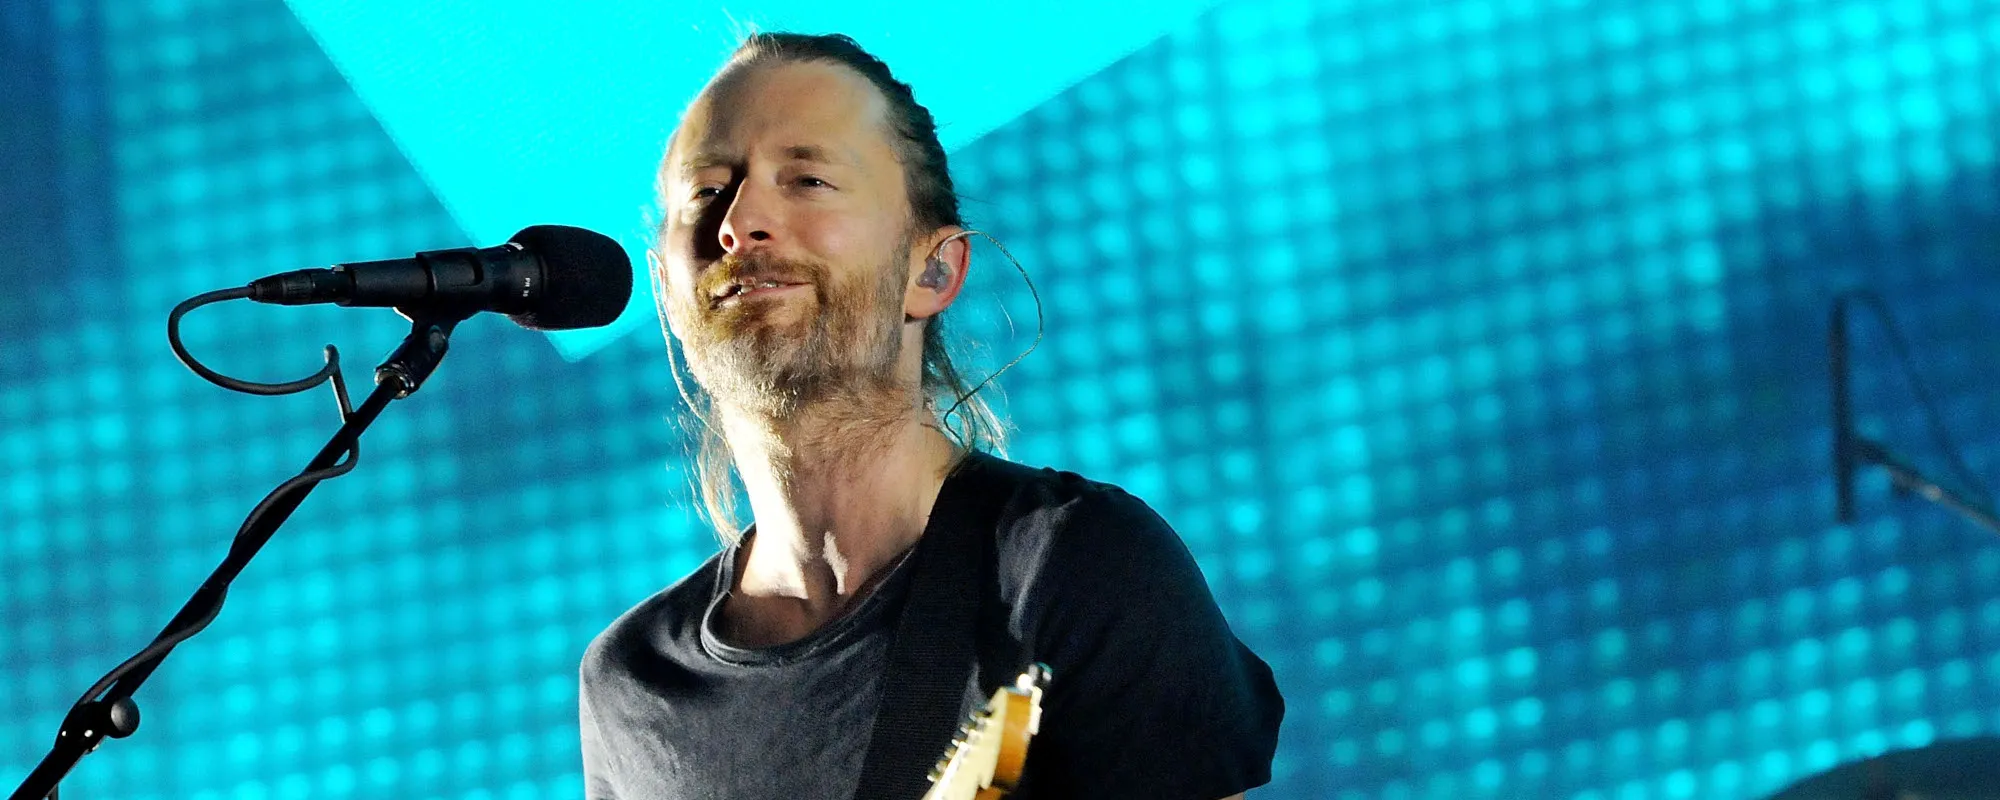 The Meaning Behind “No Surprises” by Radiohead and Why the Band Have to Play It Slow